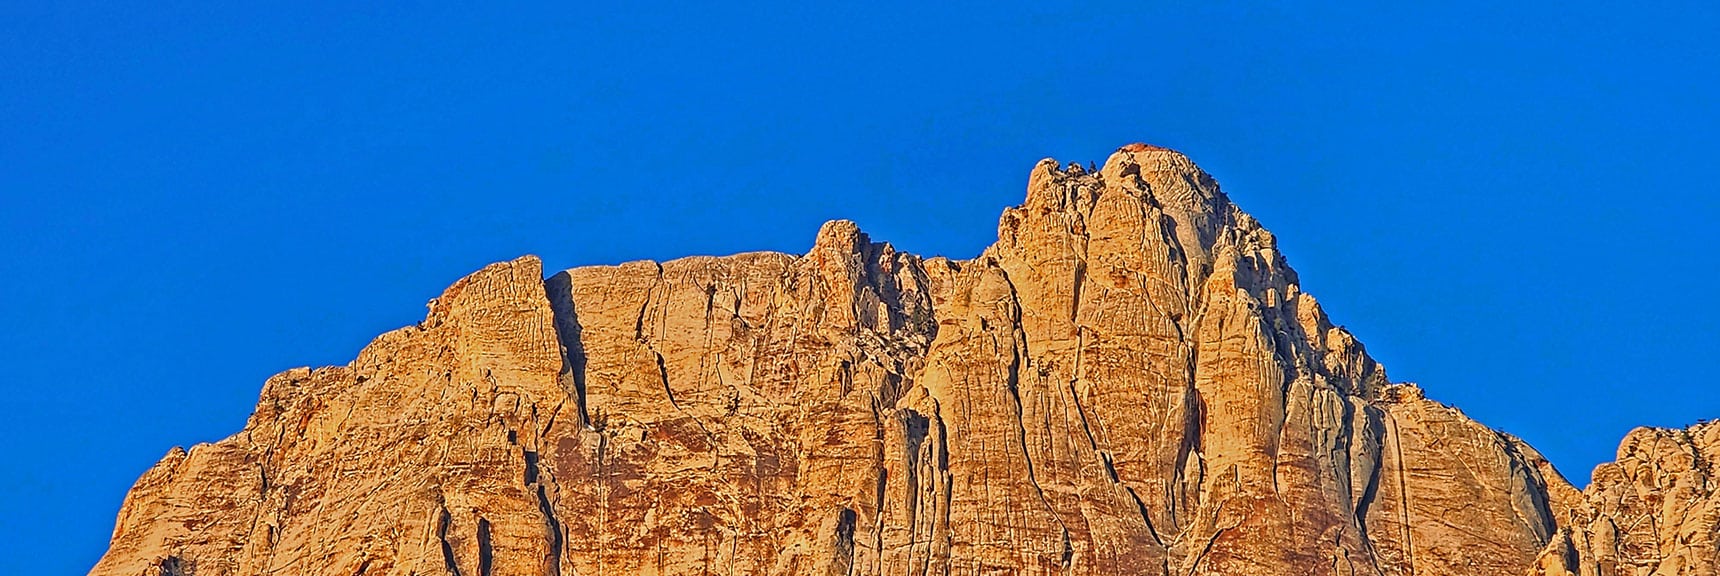 Close-up of Mt. Wilson Summit | Knoll Trail | Red Rock Canyon National Conservation Area, Nevada | David Smith | LasVegasAreaTrails.com